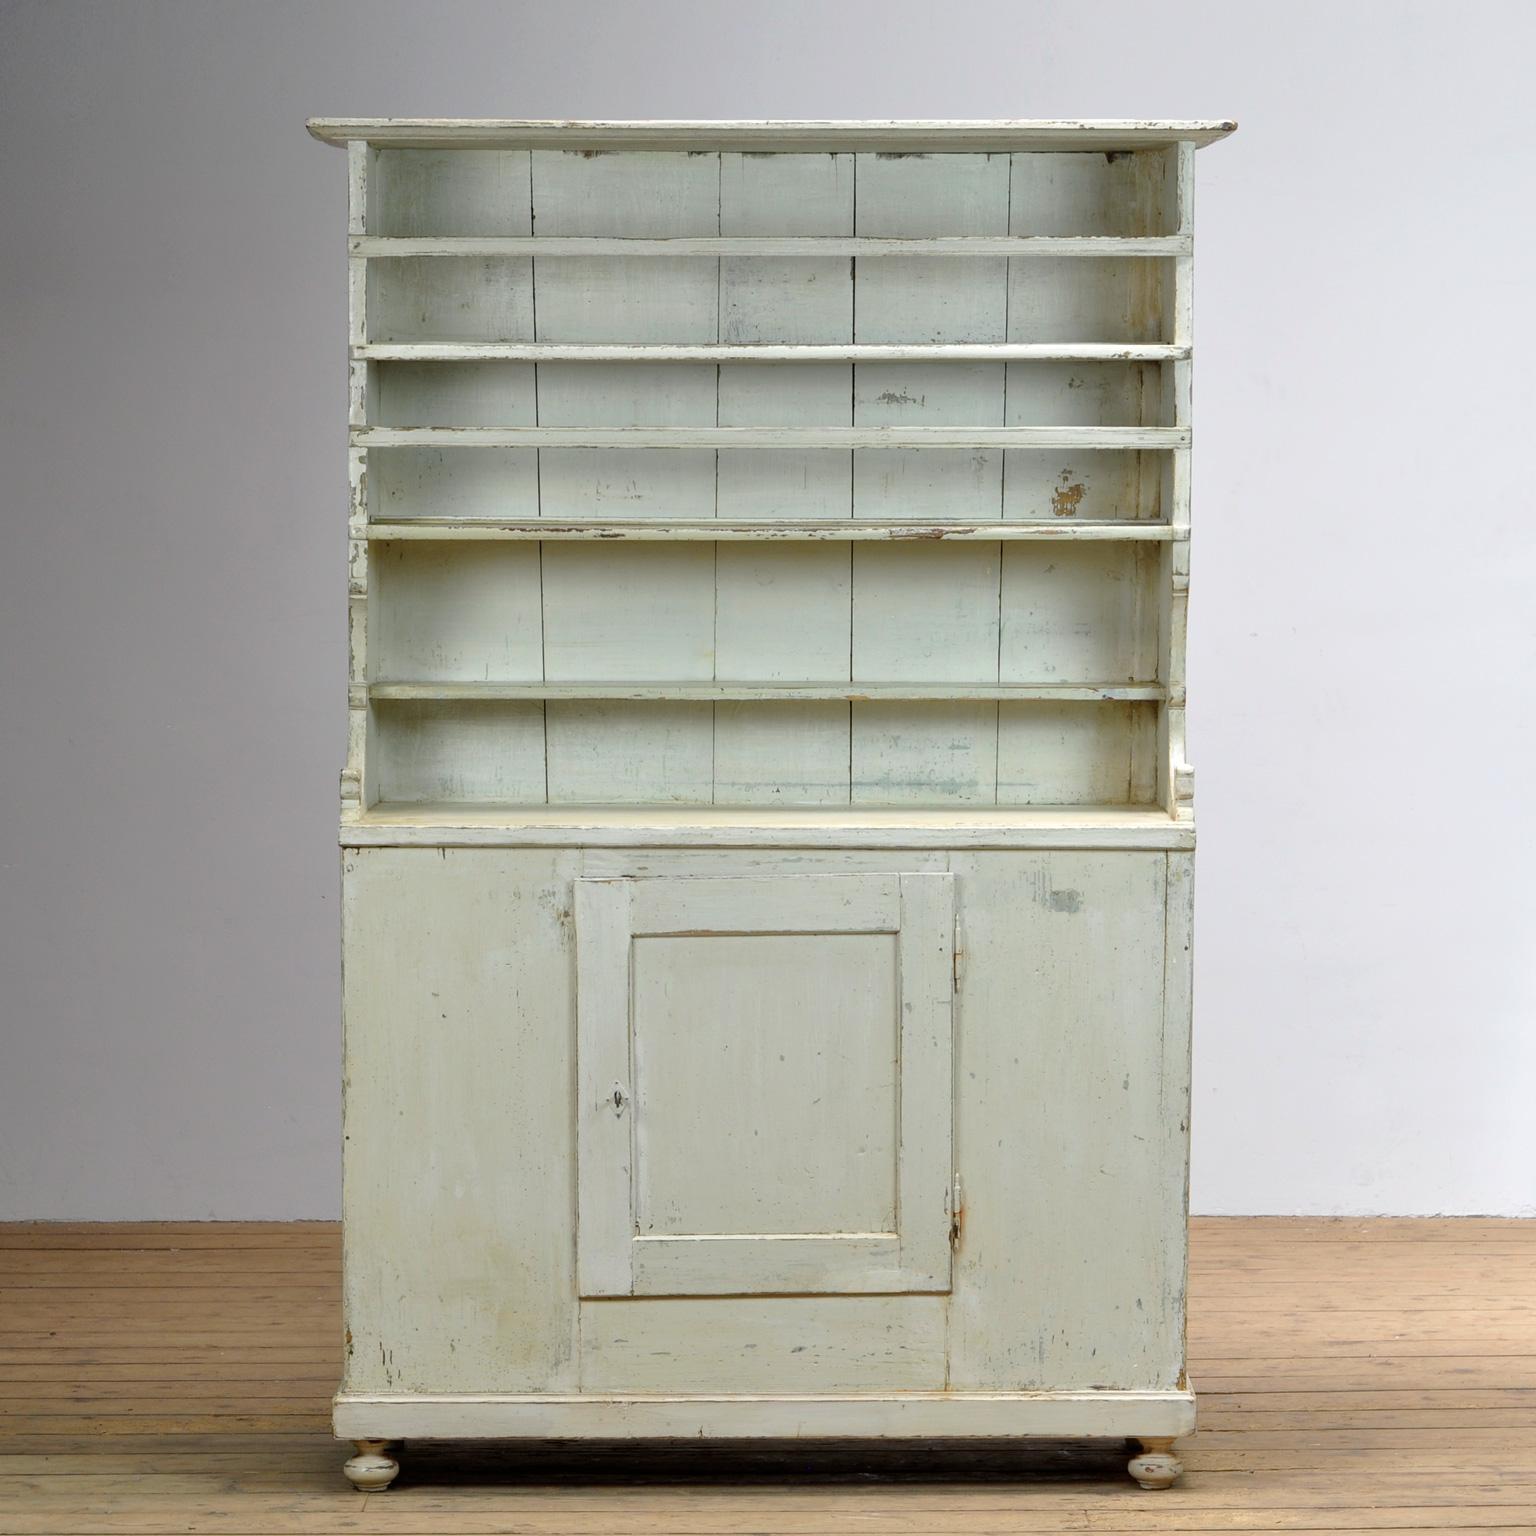 Lovely vintage farmhouse dresser. Original off white paint. Open top storage to the top with three shelves. Closed cupboard storage beneath with one shelf. General wear and tear in keeping with it’s age.